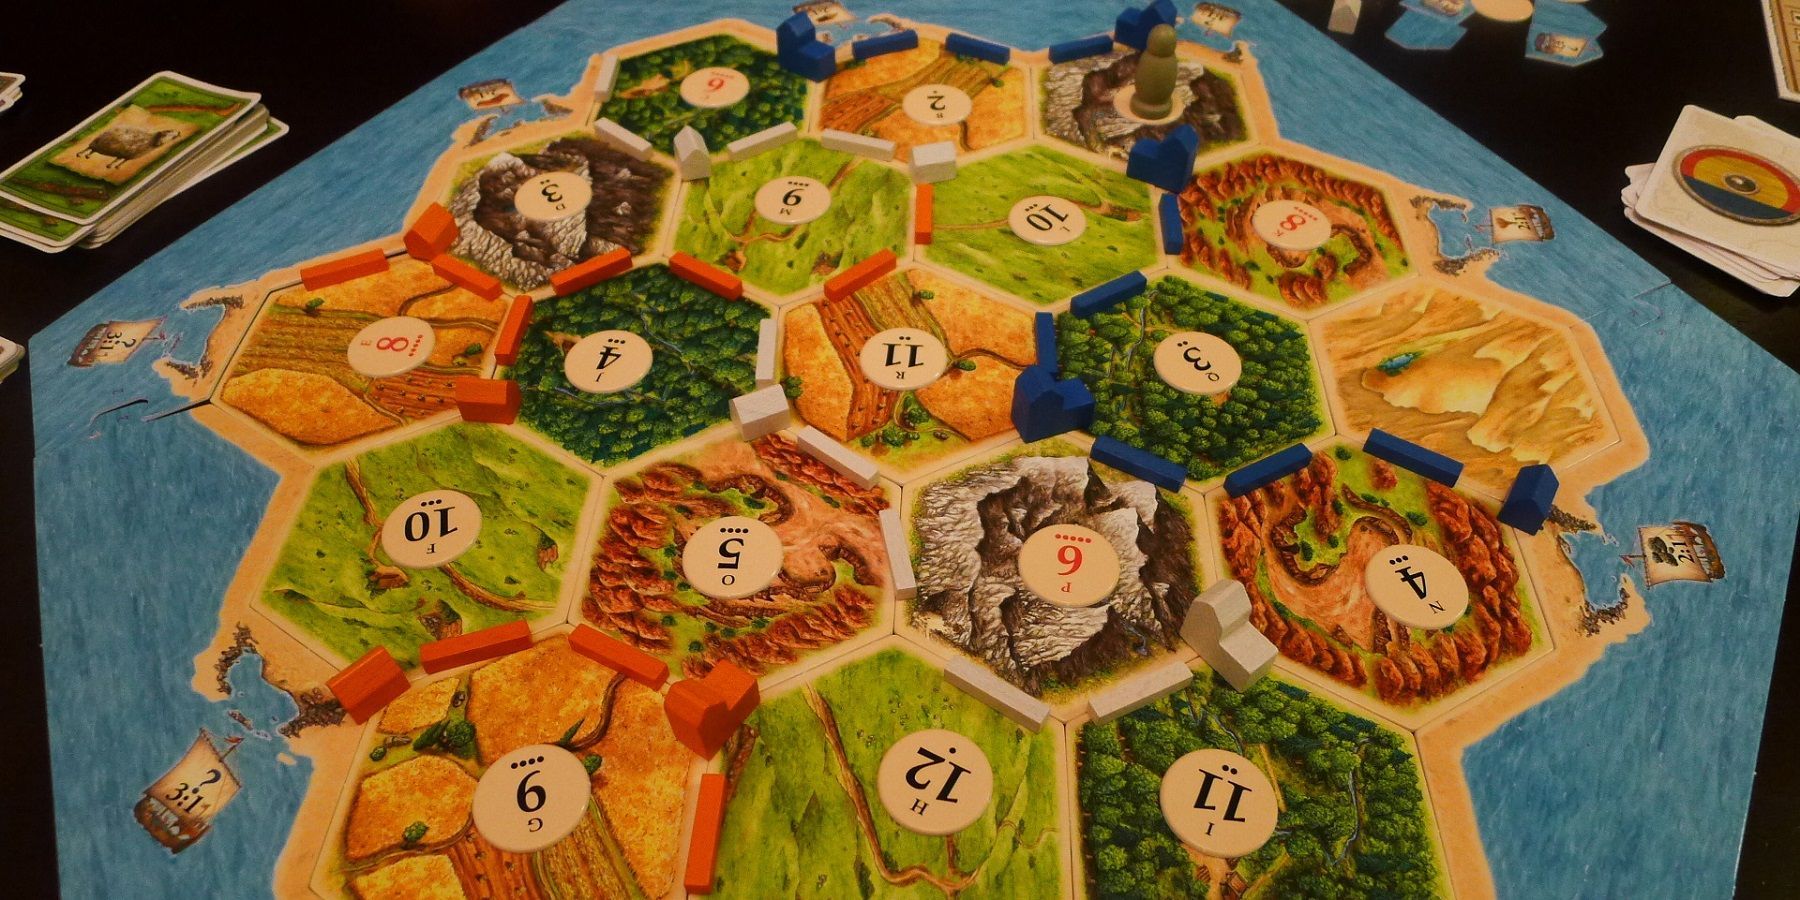 Settlers of Catan Board Game Play Set